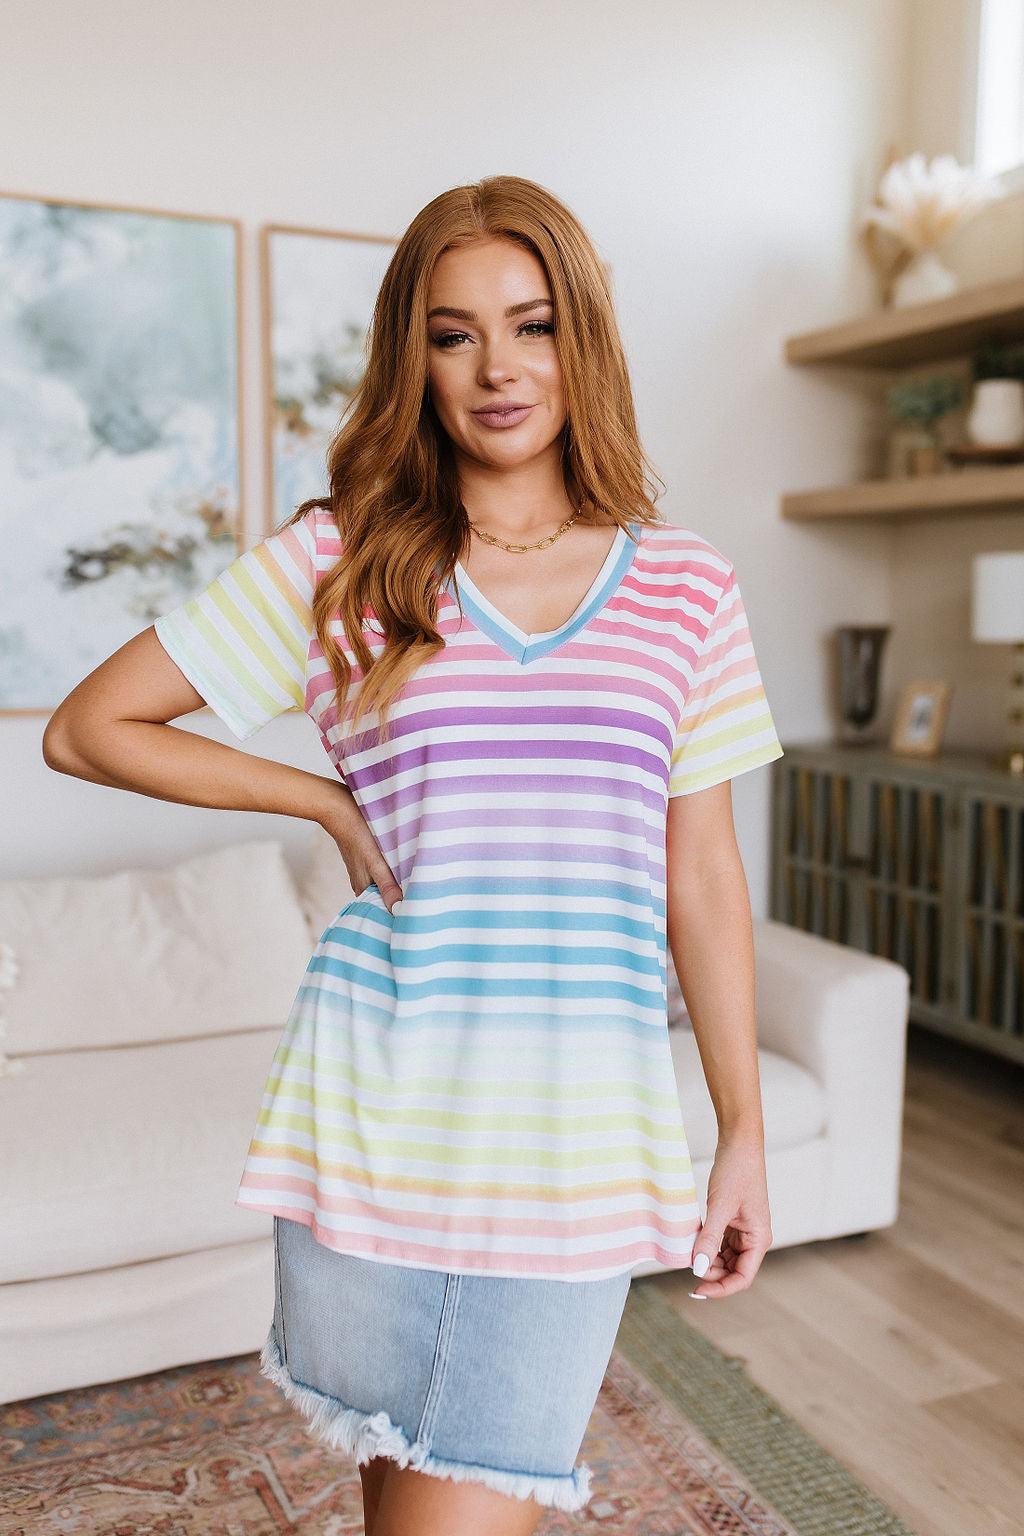 Looking for Rainbows V-Neck Striped Top Womens Ave Shops   